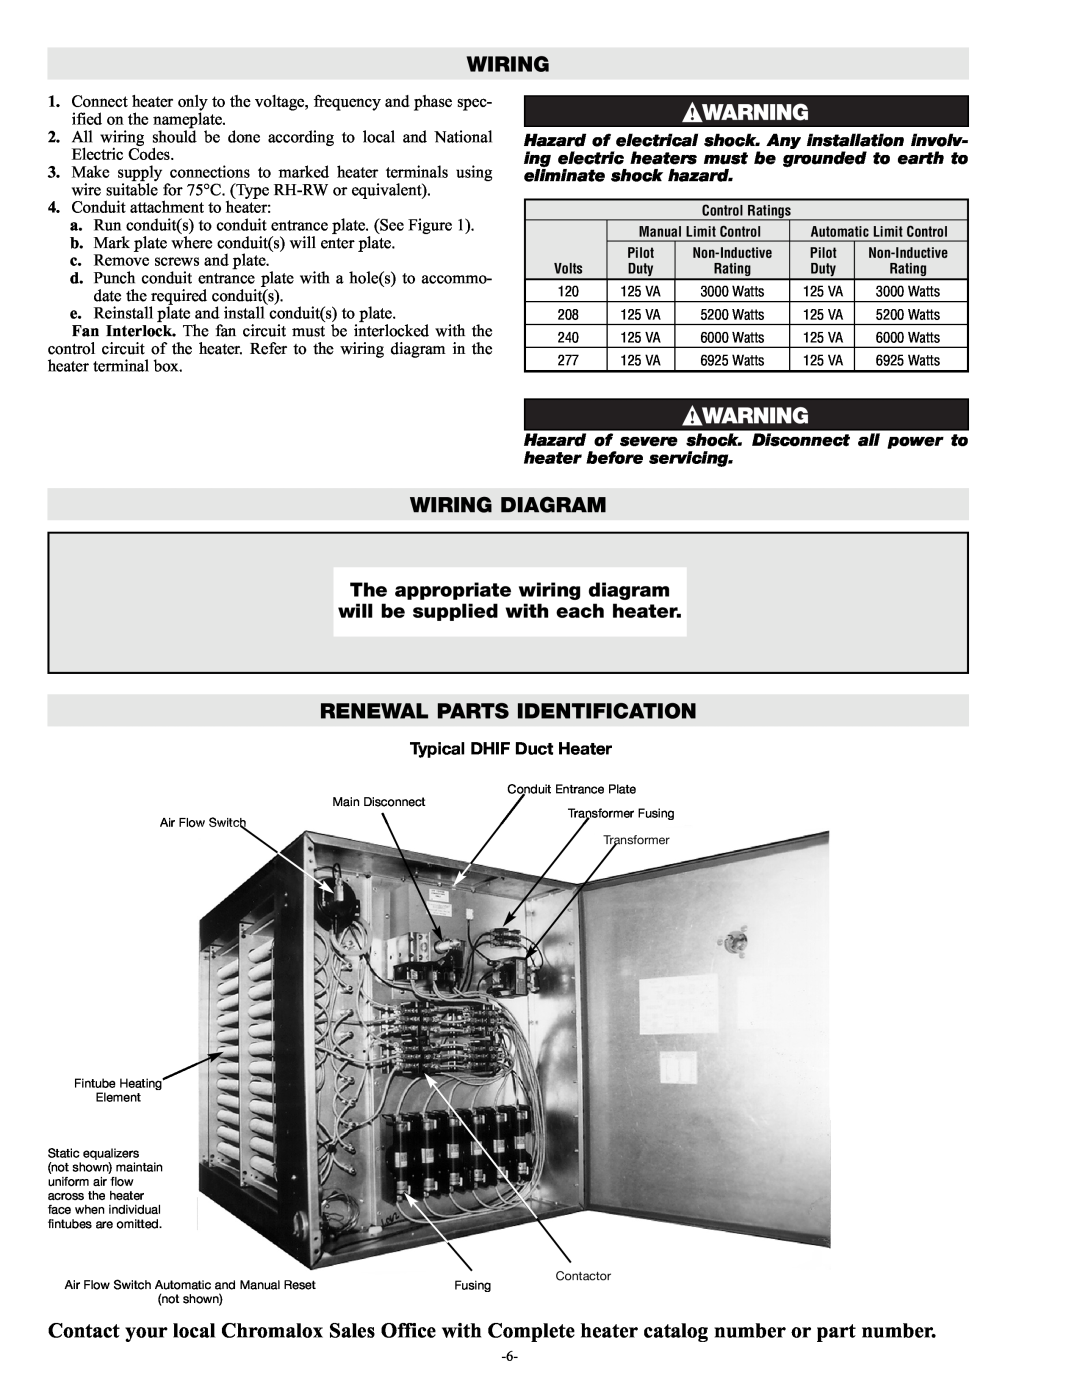 Chromalox PF455-3 manual Wiring Diagram, Renewal Parts Identification, Typical DHIF Duct Heater 